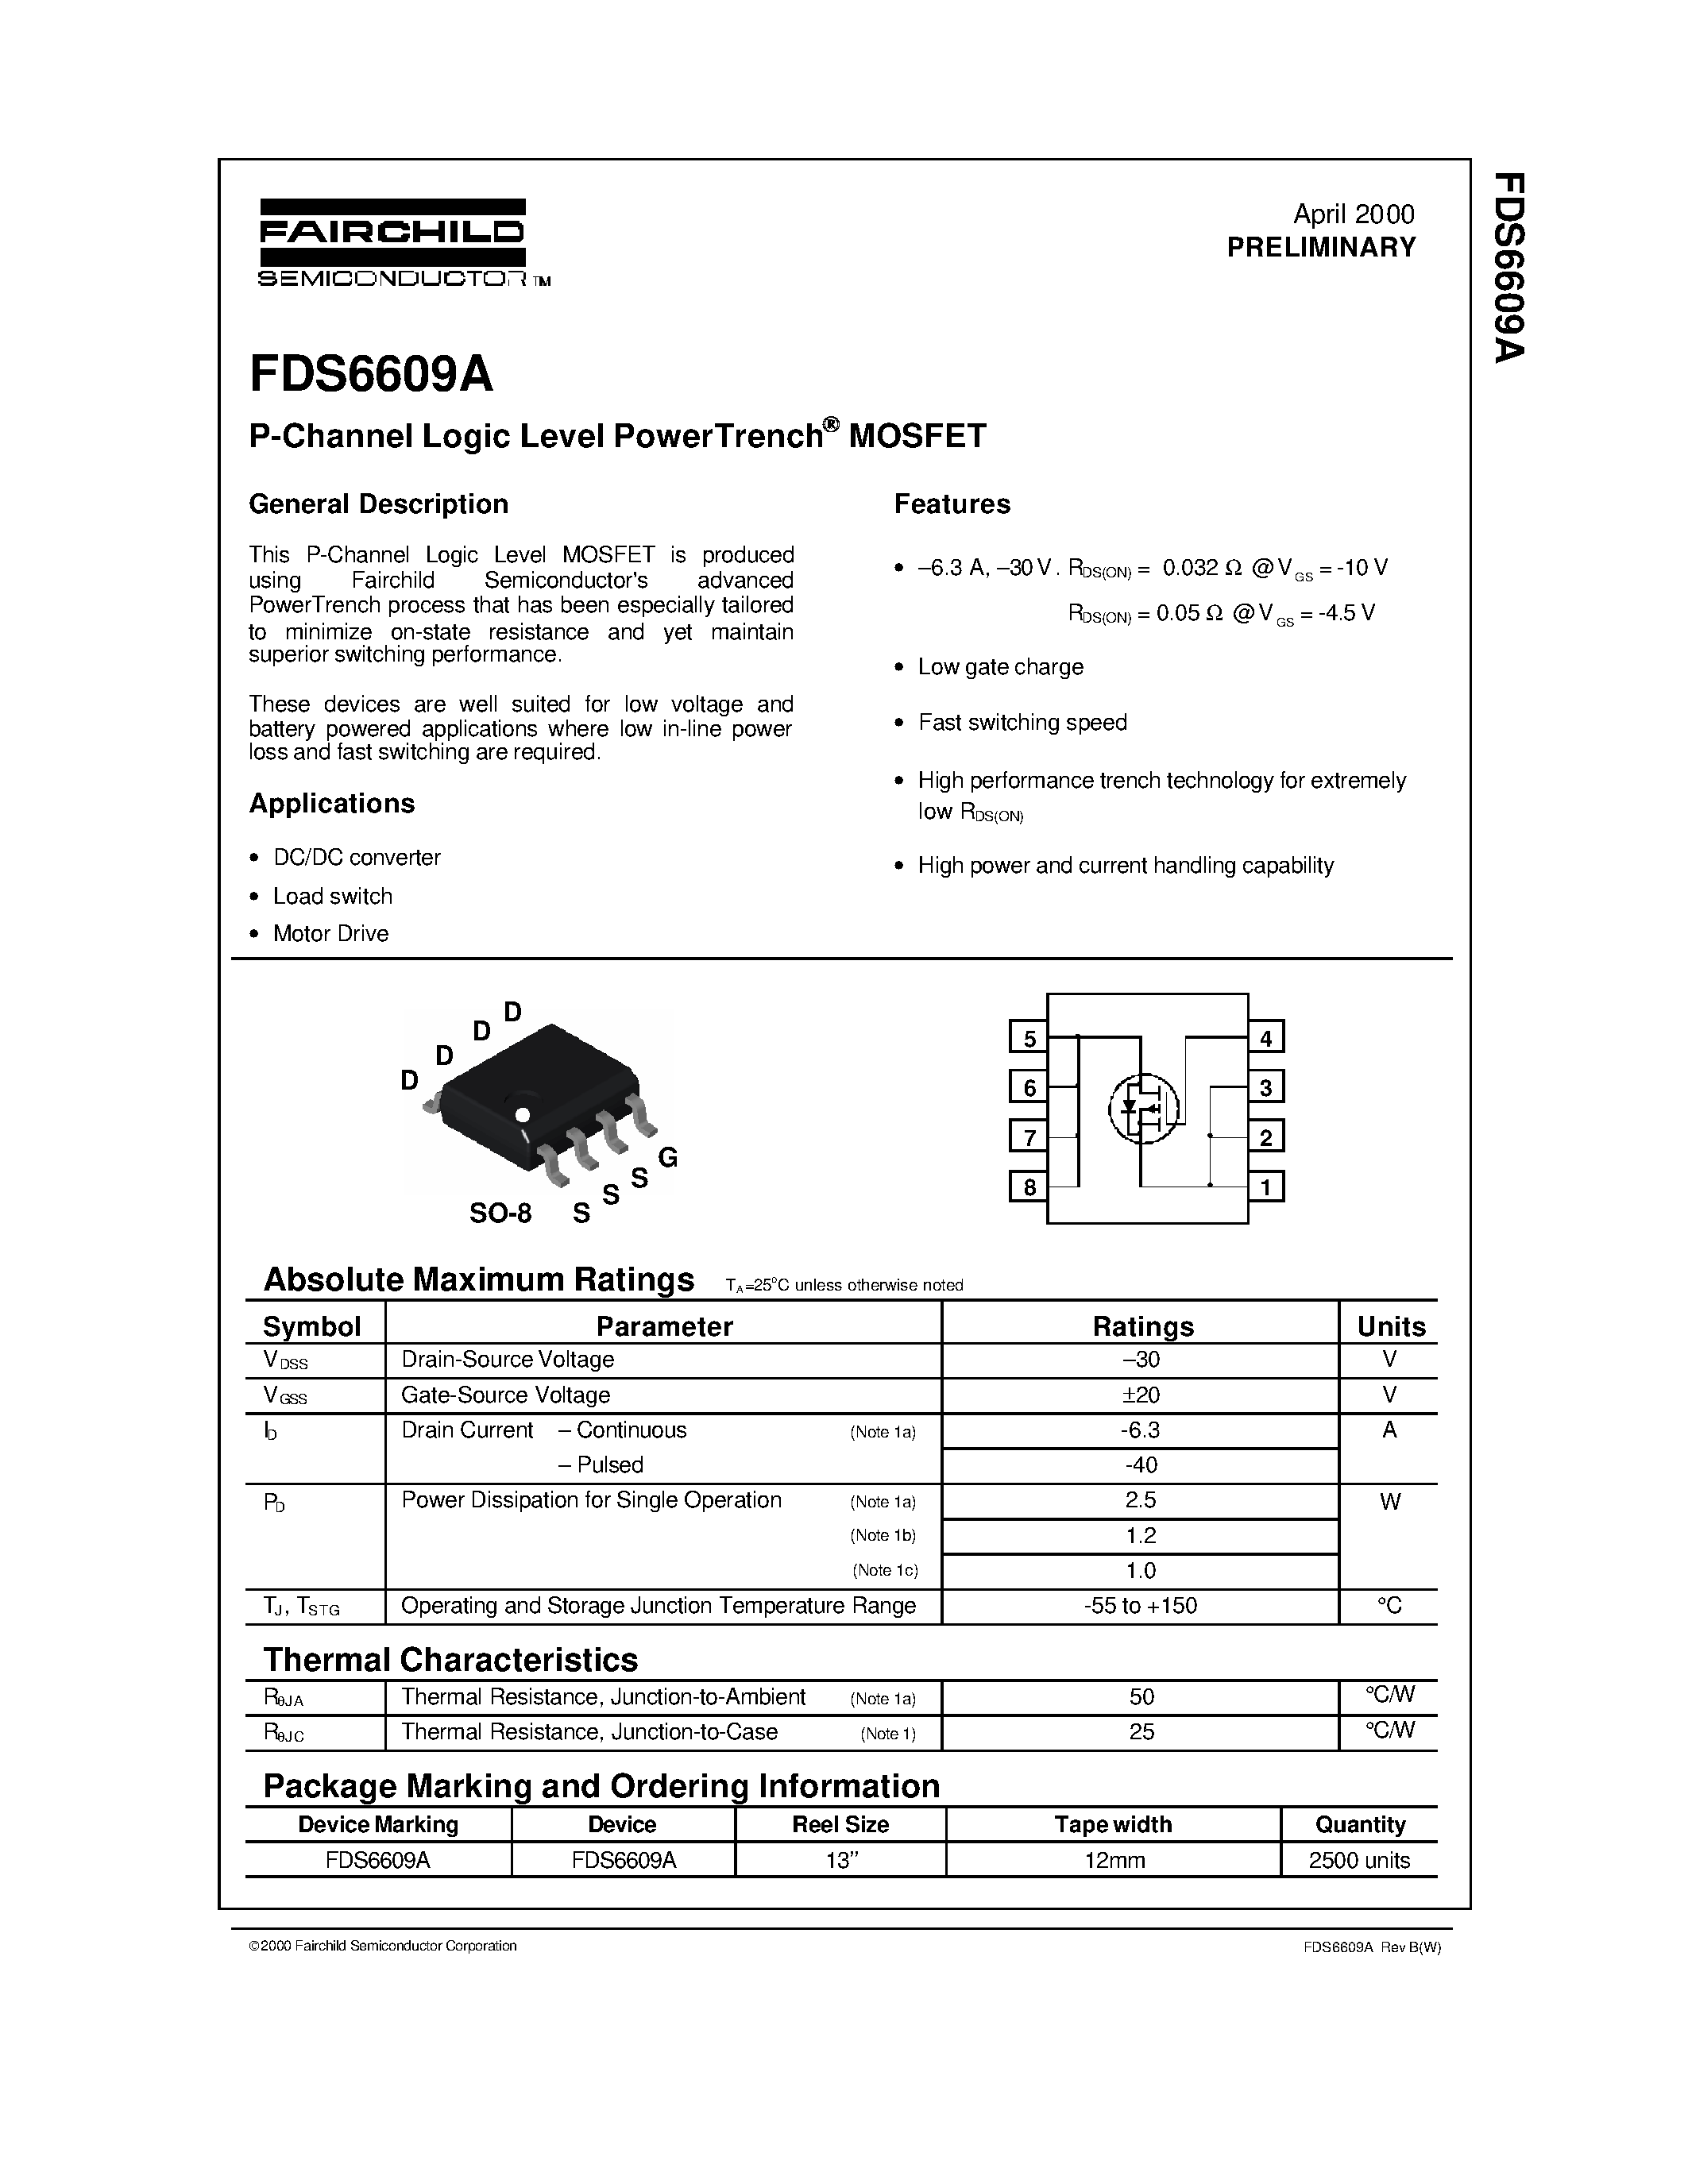 Даташит FDS6609A - P-Channel Logic Level PowerTrench MOSFET страница 1